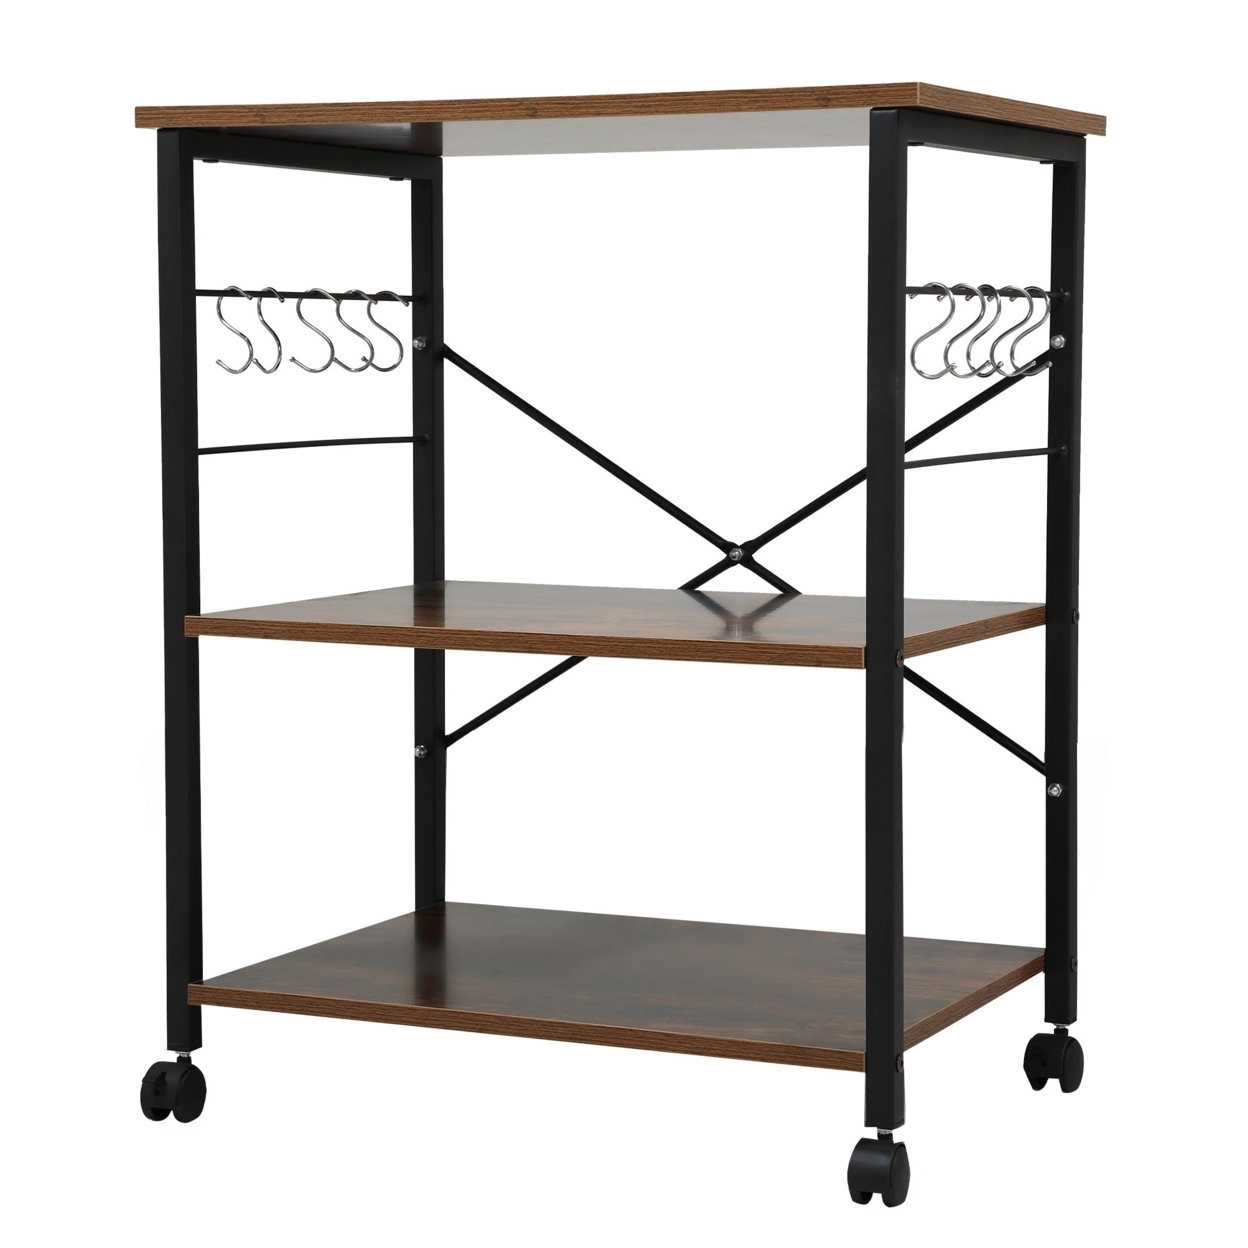 Simple Wood Kitchen Cart with 3-Tier Storage Space, Movable Microwave Stand with 10 Hooks - Brown and Frosted Black